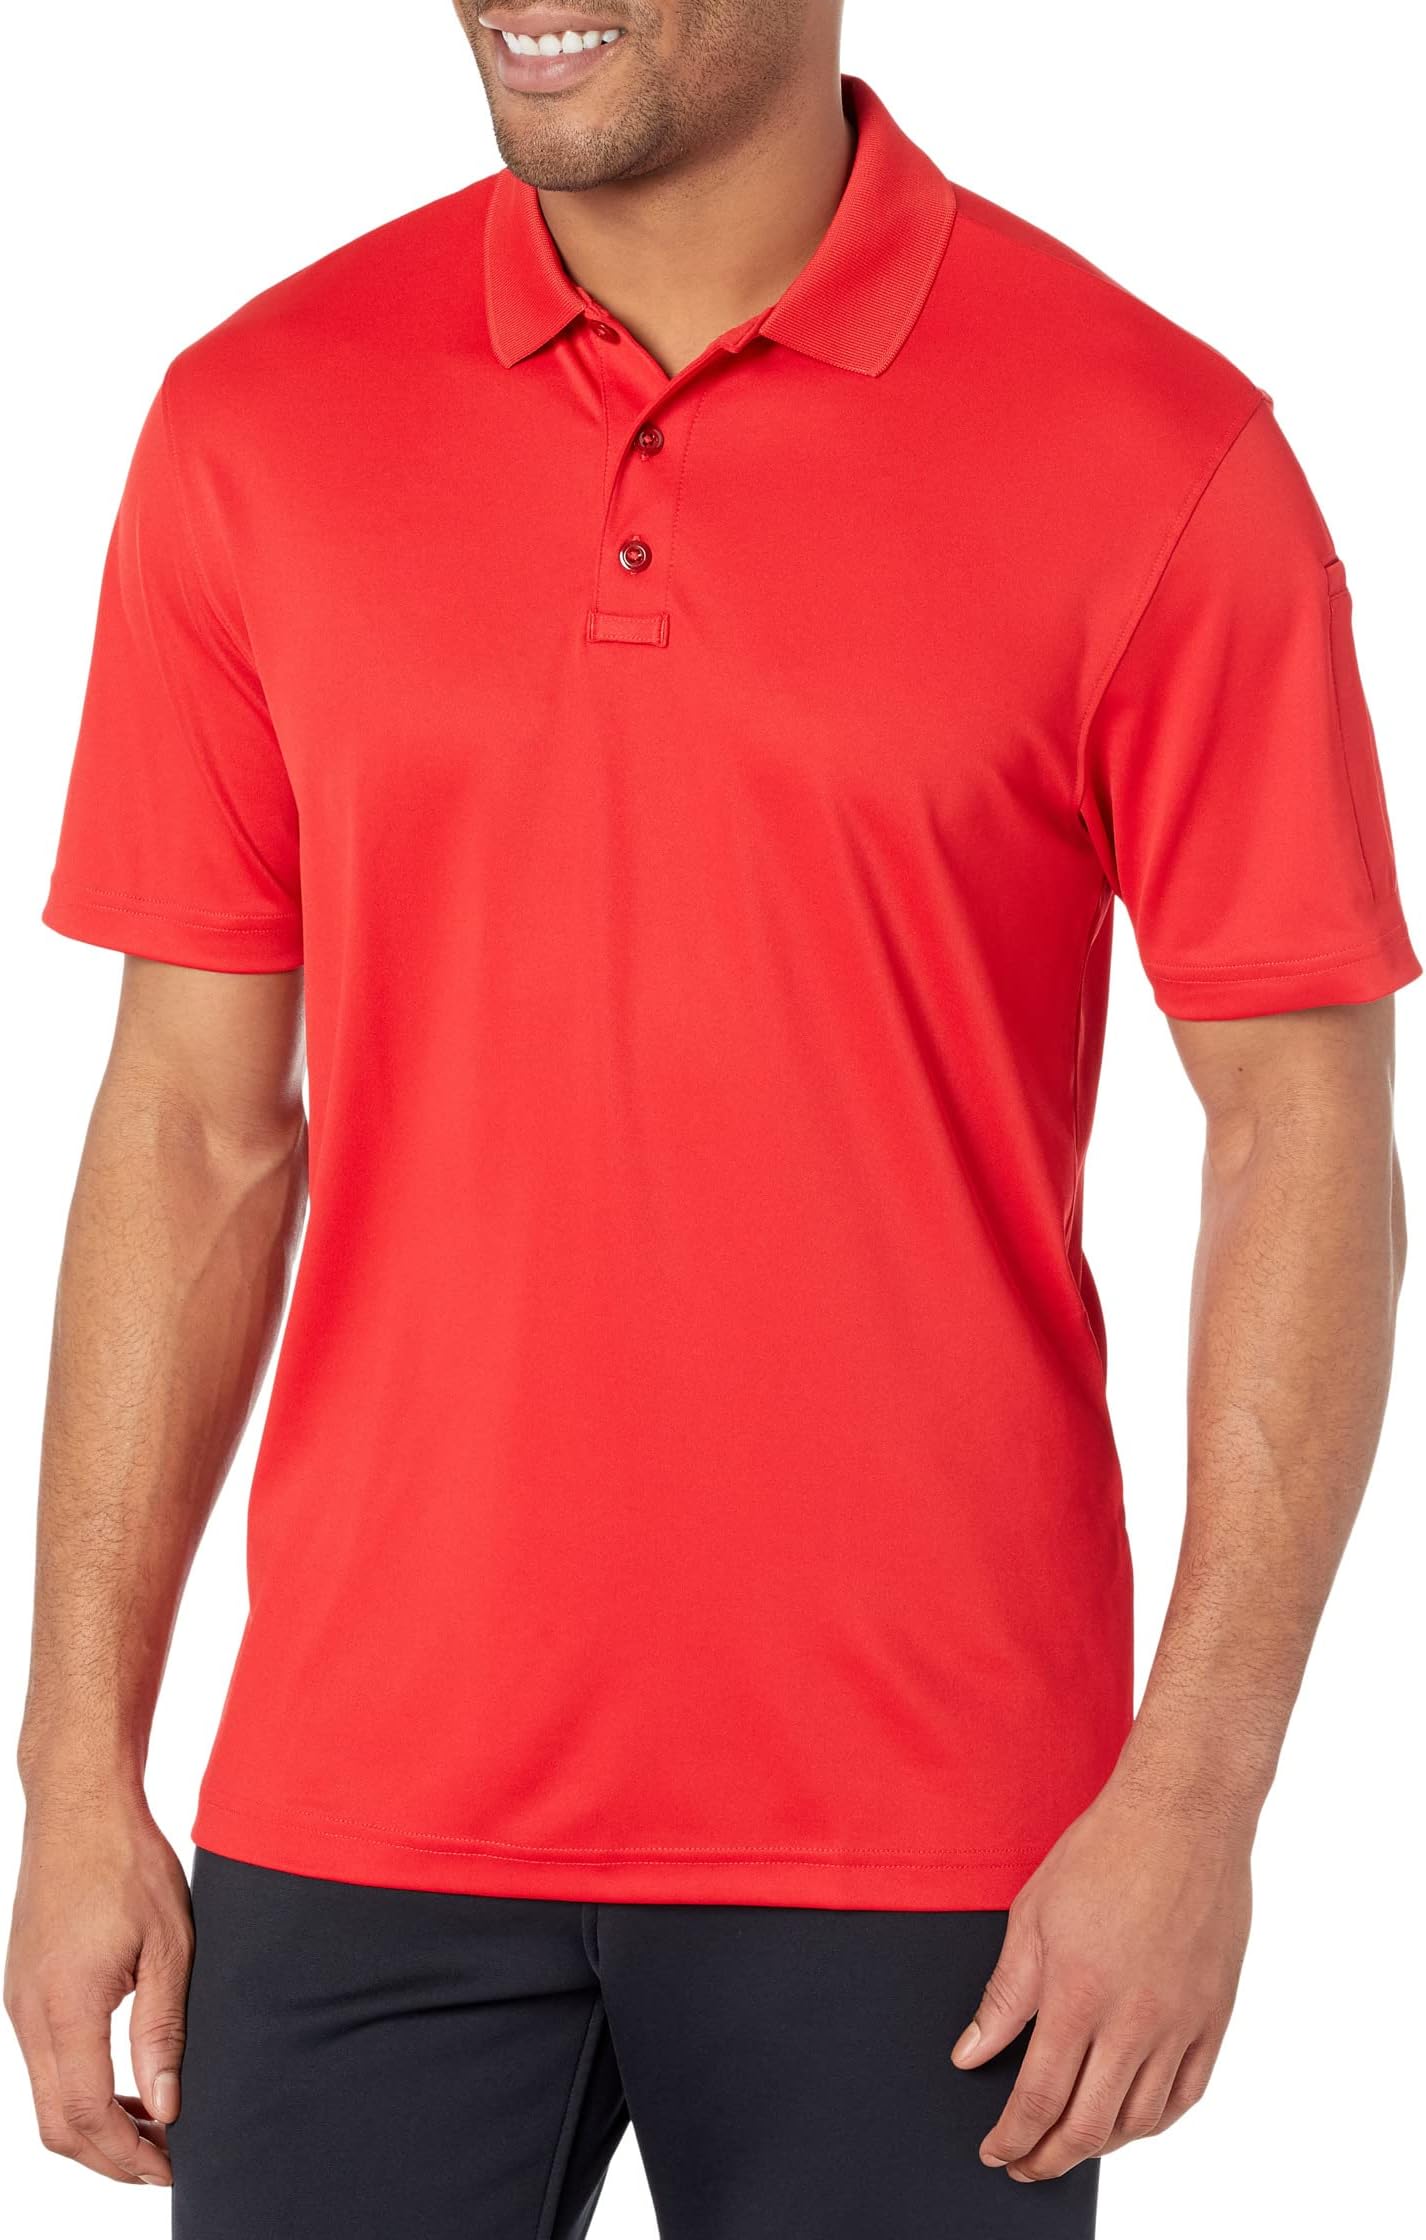 Tac Performance Polo 2.0 Under Armour, цвет Red/Red lynch s red seas under red skies